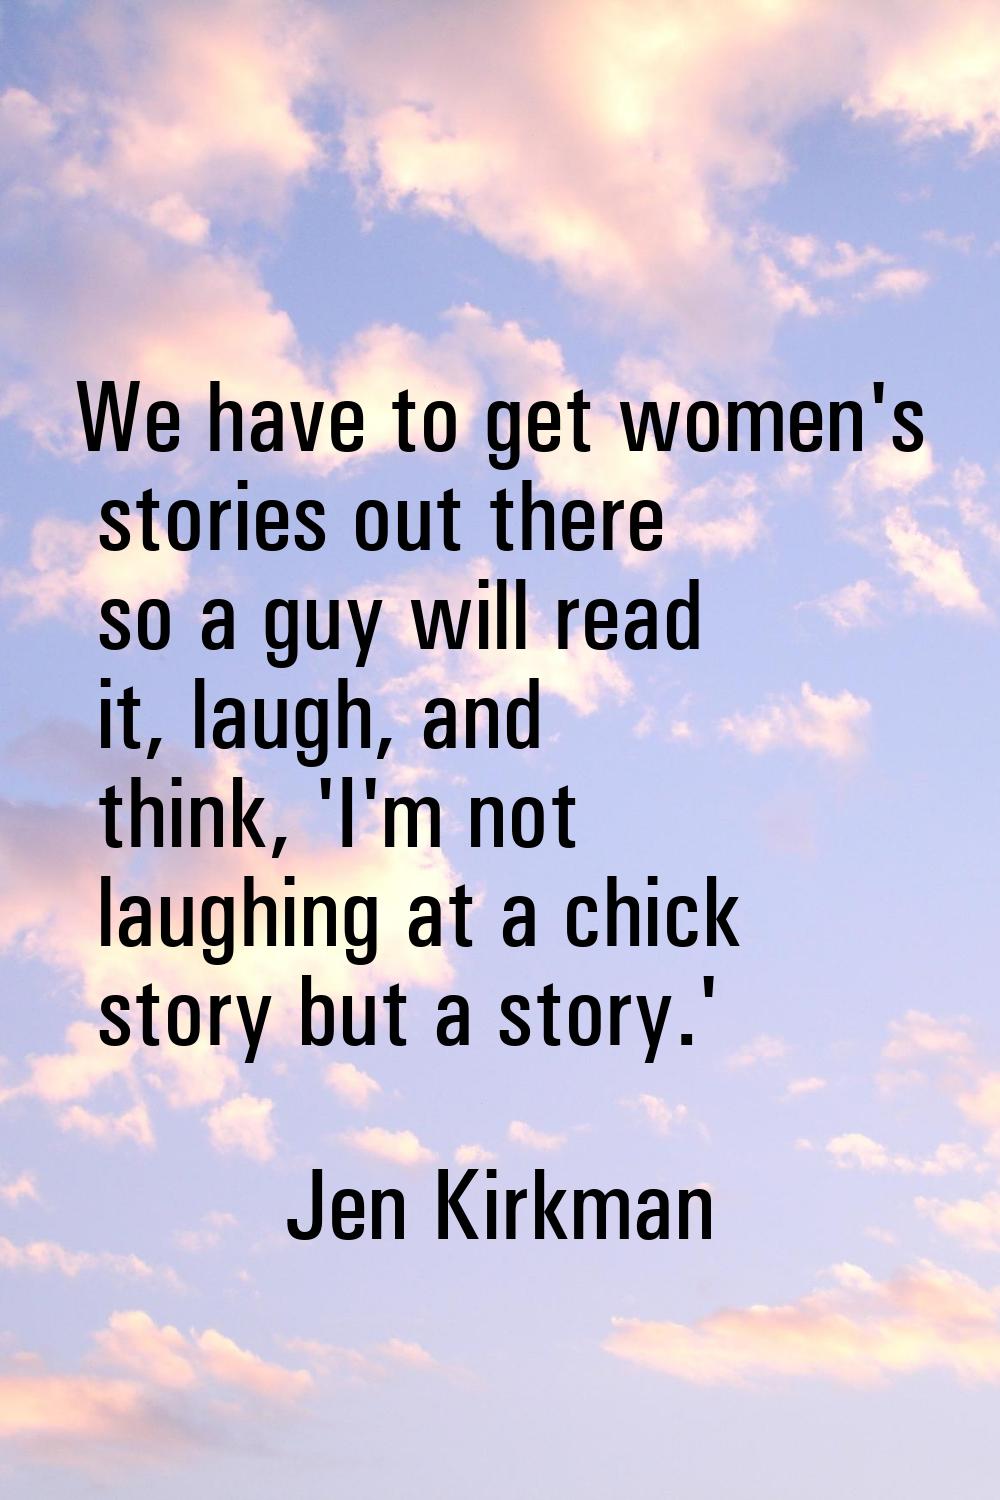 We have to get women's stories out there so a guy will read it, laugh, and think, 'I'm not laughing